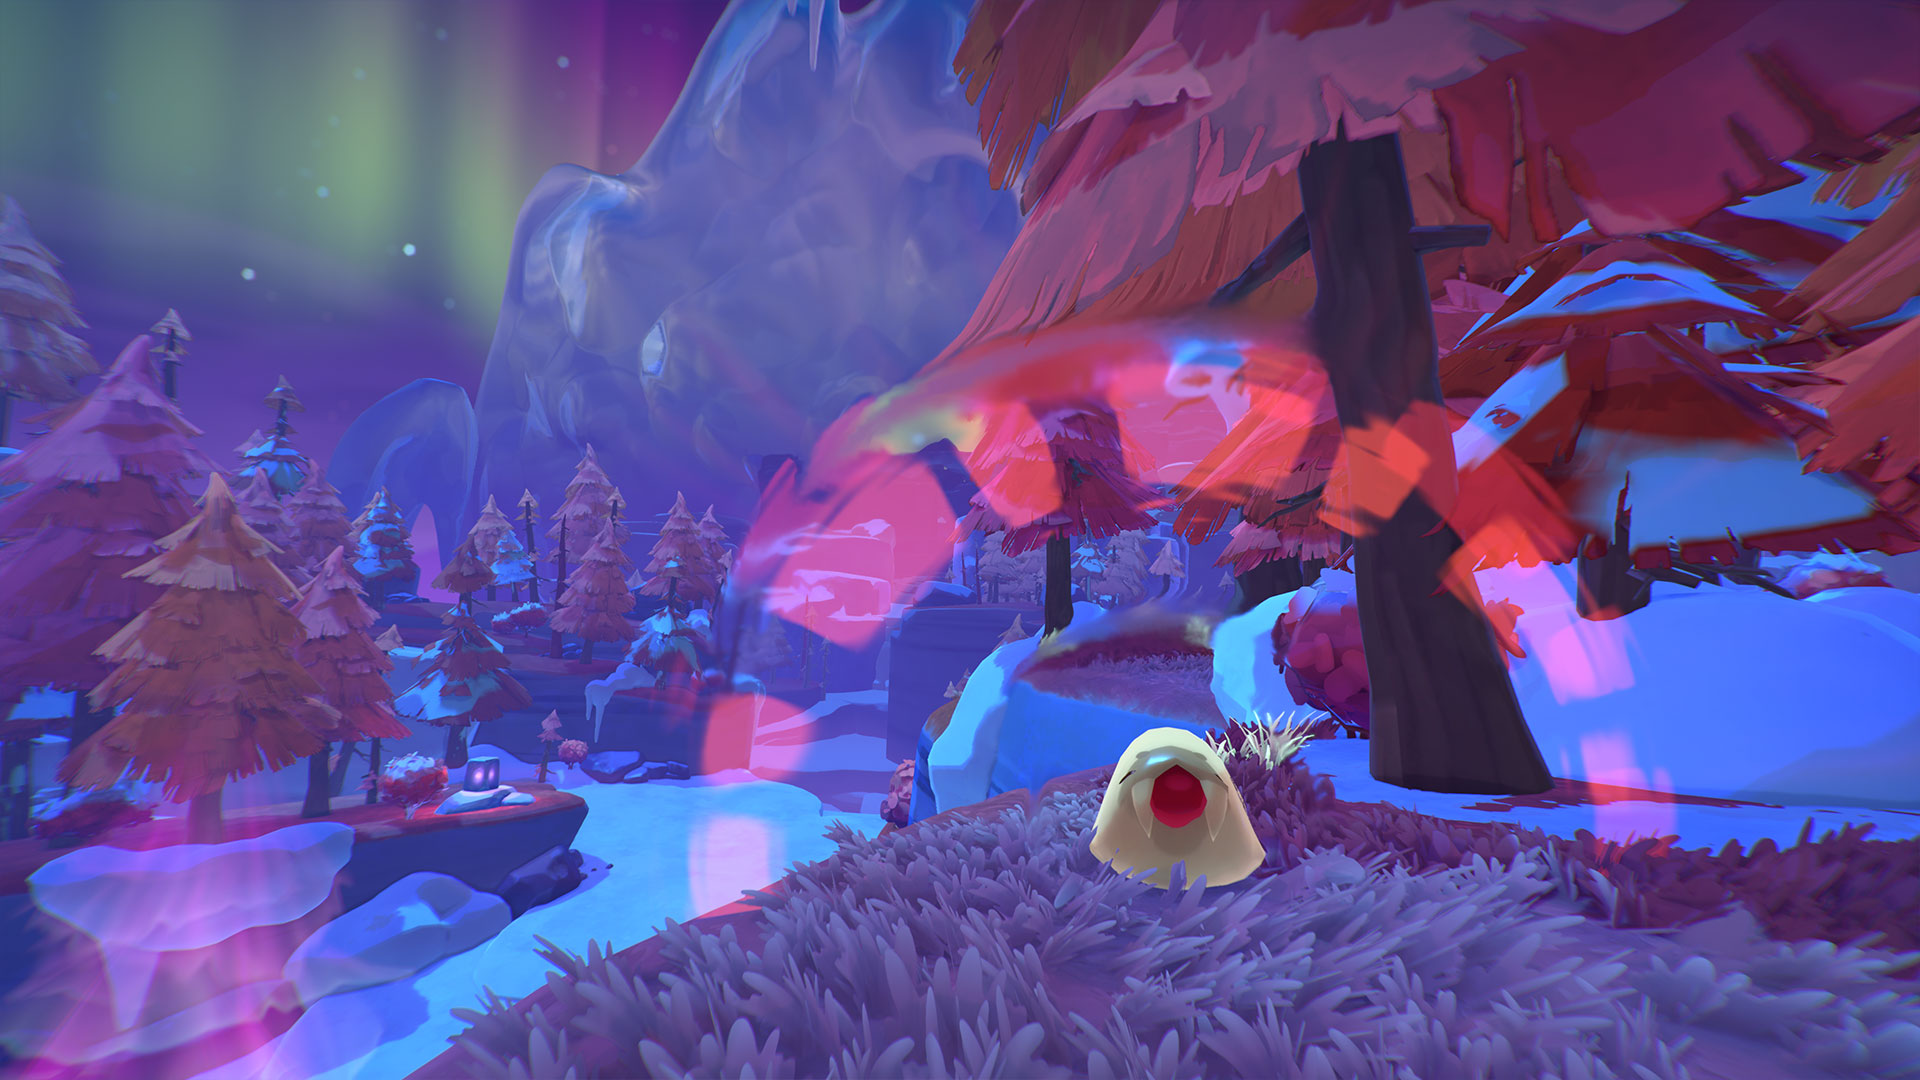 Slime Rancher 2's new biome is a magical winter wonderland and